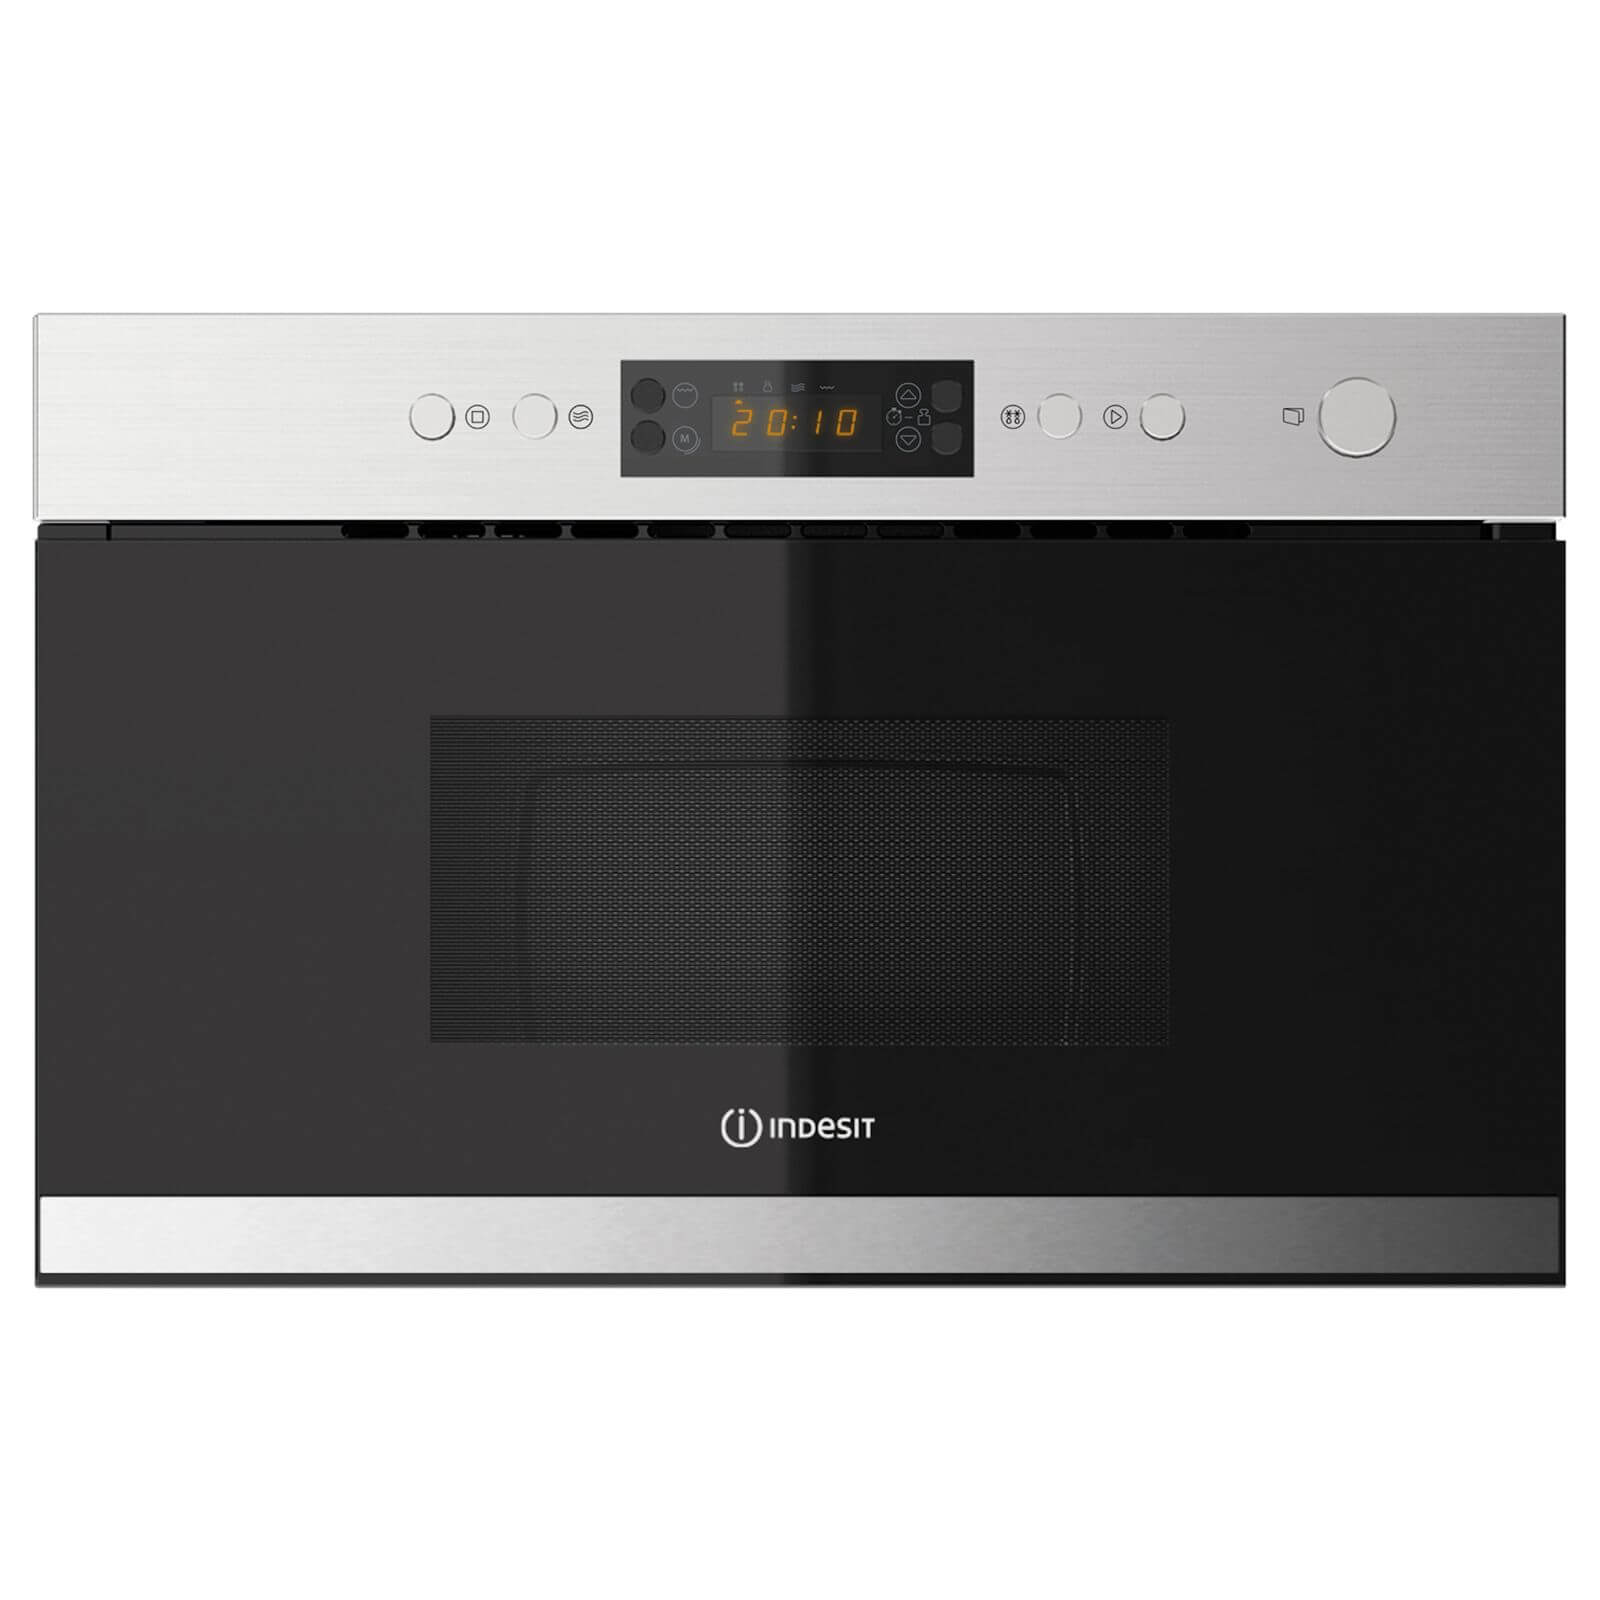 Indesit Aria MWI 3213 IX Built-in Microwave - Stainless Steel